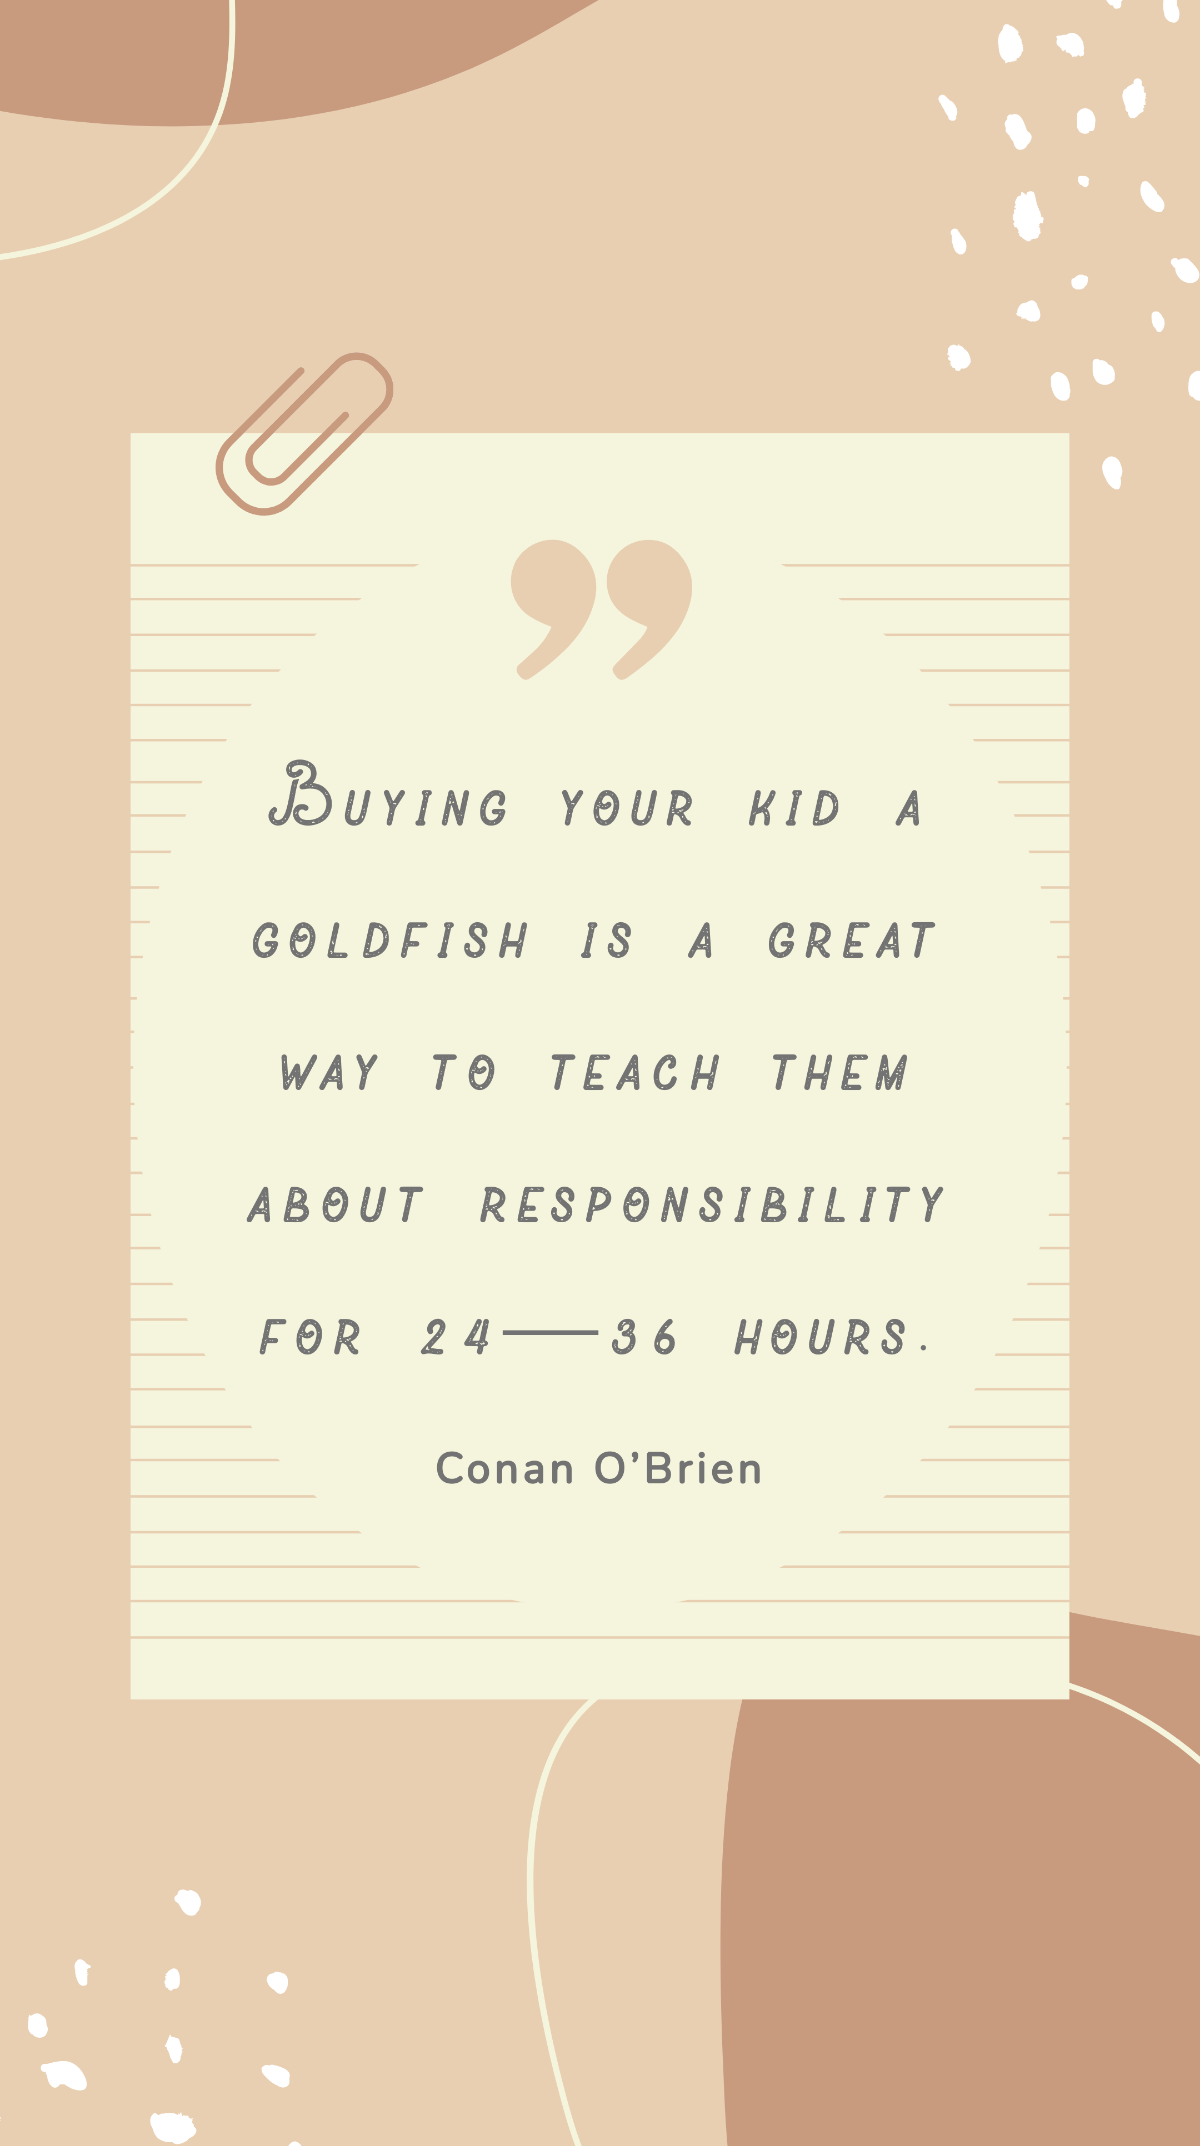 Conan O’Brien - Buying your kid a goldfish is a great way to teach them about responsibility for 24—36 hours. Template